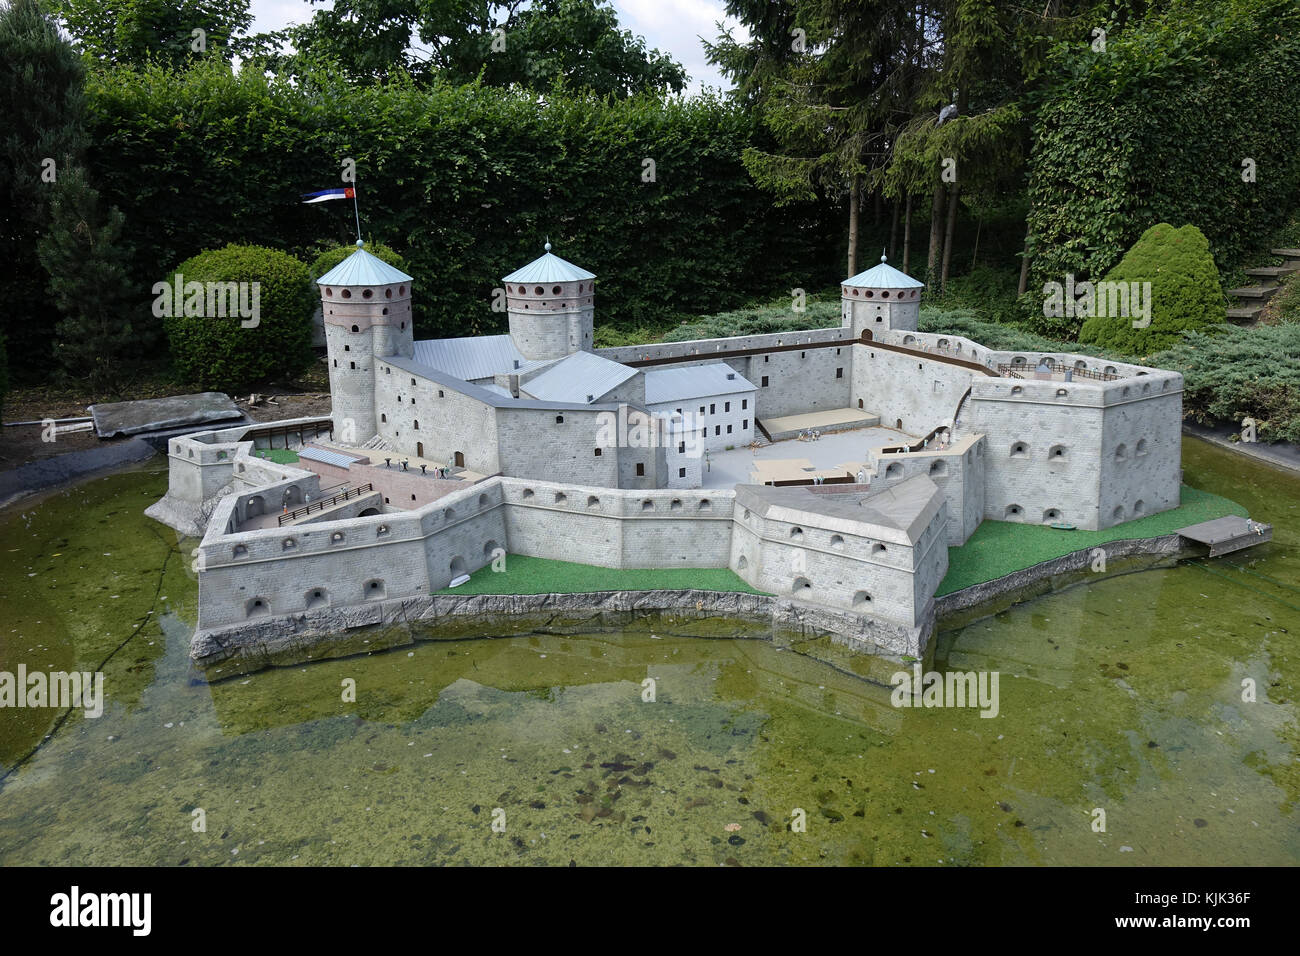 A miniature of Olavinlinna (lit. Olaf's Castle) in the Finnish city of Savonlinna at the exhibition site of Mini-Europe in the Belgian capital Brussels, 26.06.2017. Olavinlinna is a 15th-century castle founded by Erik Axelsson Tott and named after Saint Olof. Builidng work began in 1475, when Finnland was still part of the Swedish Kingdom. Olavinlinna is considered one of the best preserved Medieval castles in northern Europe. Mini-Europe is a park located in Bruparck at the base of the Atomium in Brussels. In the park, the most impressive monuments in the European Union are recreated on a sca Stock Photo